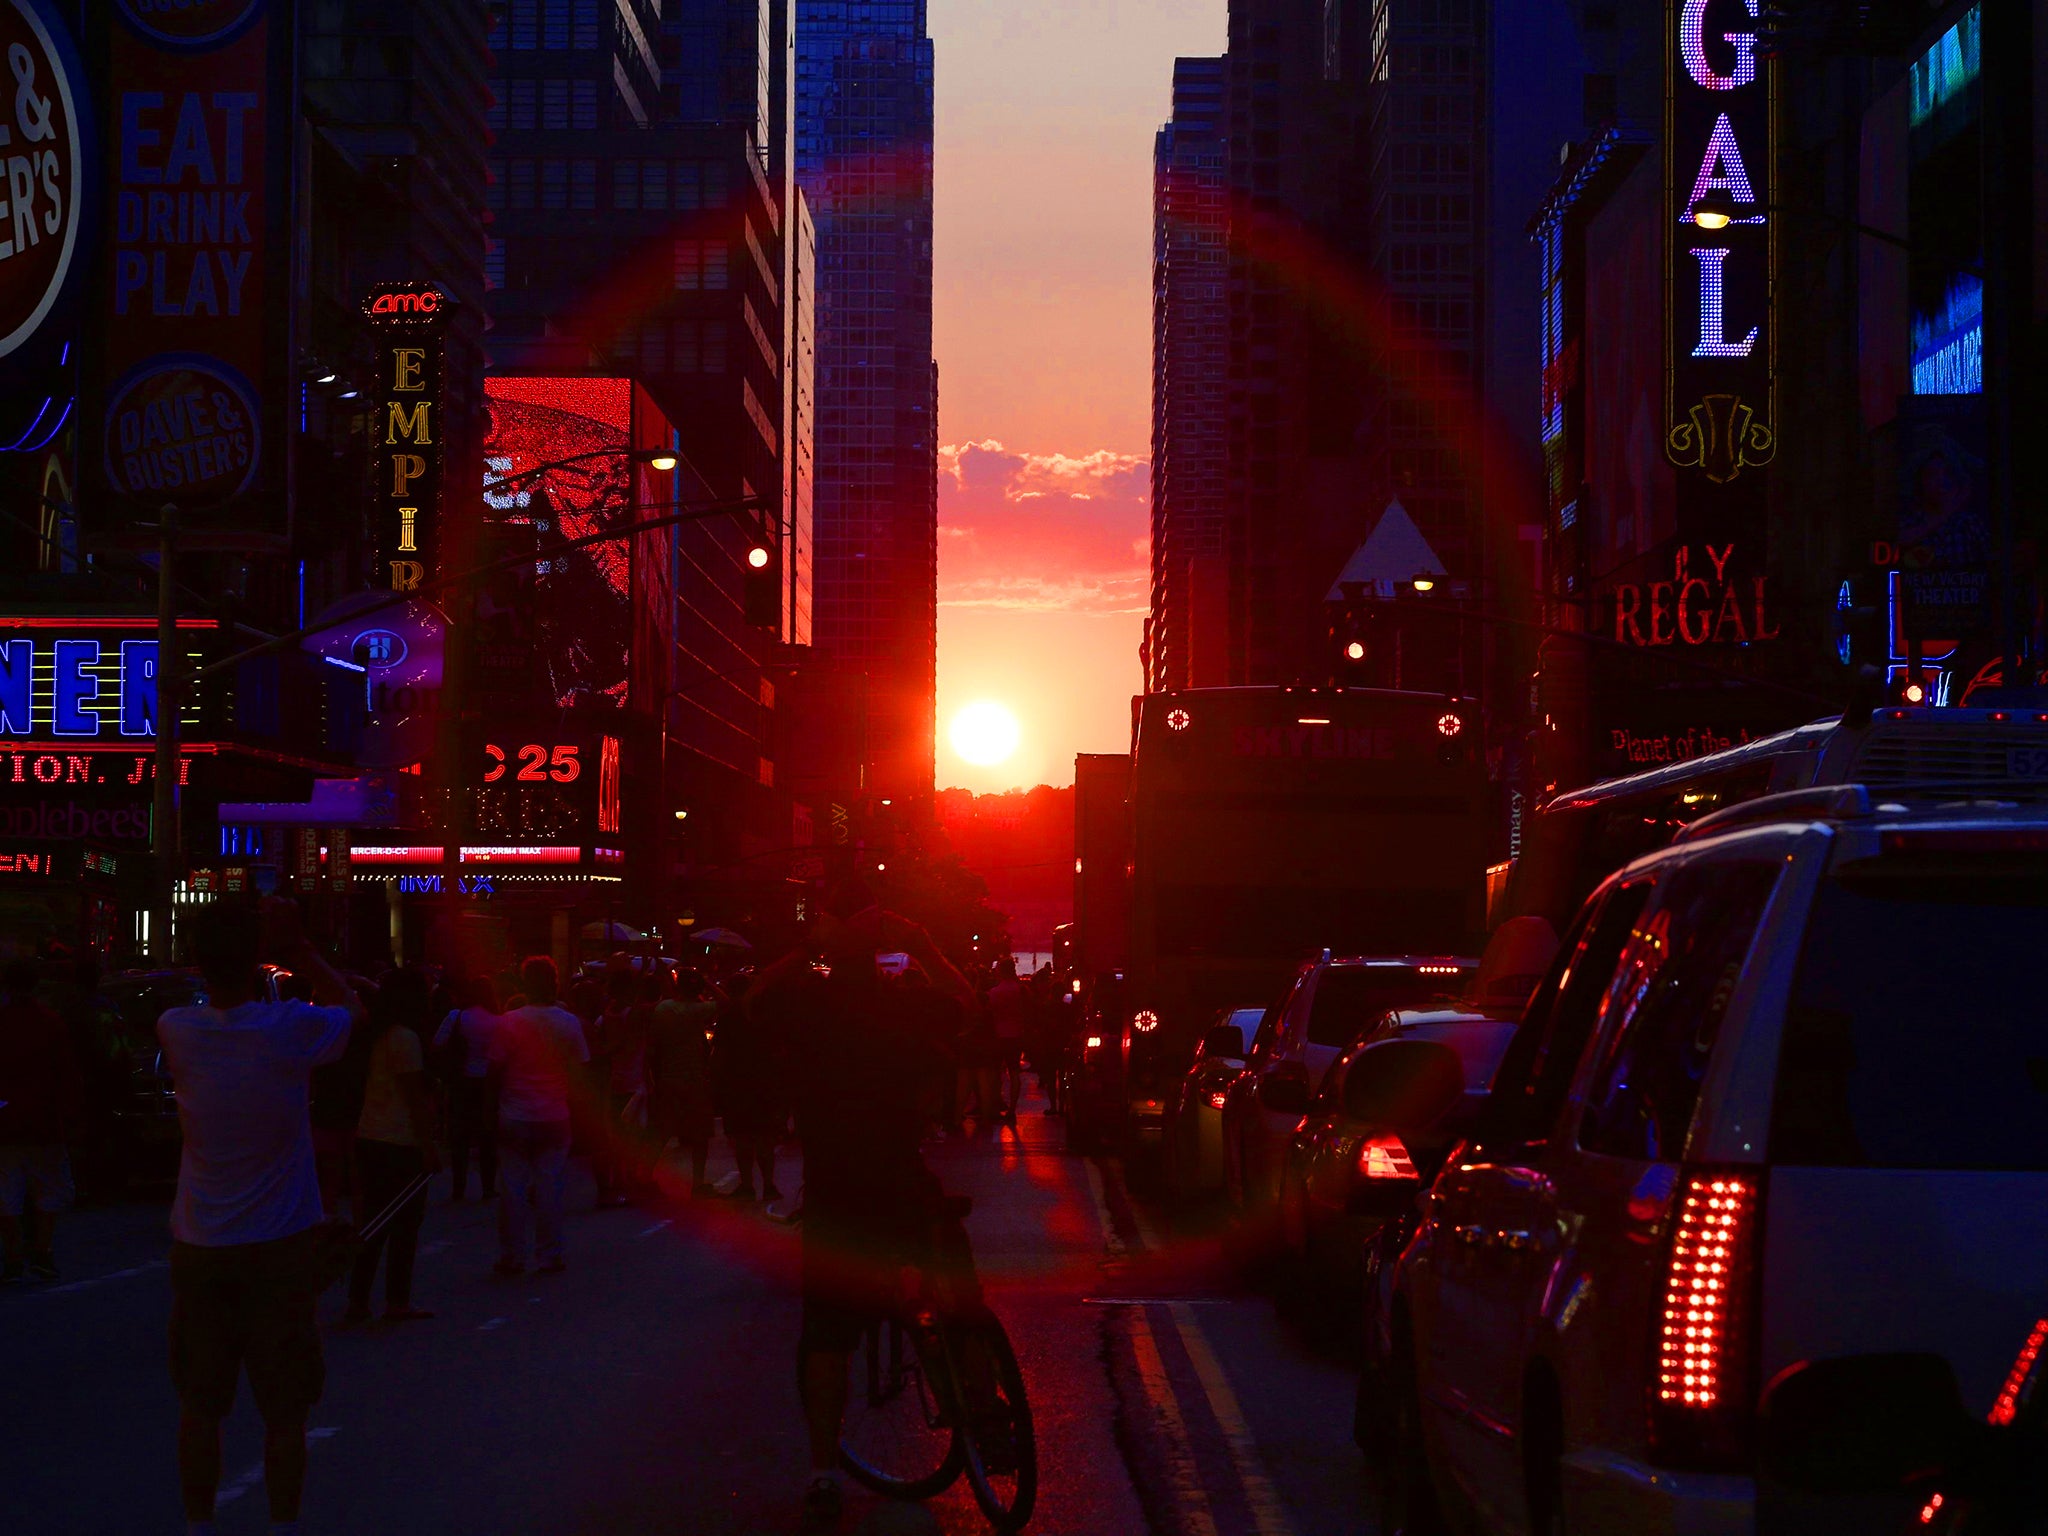 The sun is seen setting behind buildings in Times Square during the Manhattanhenge